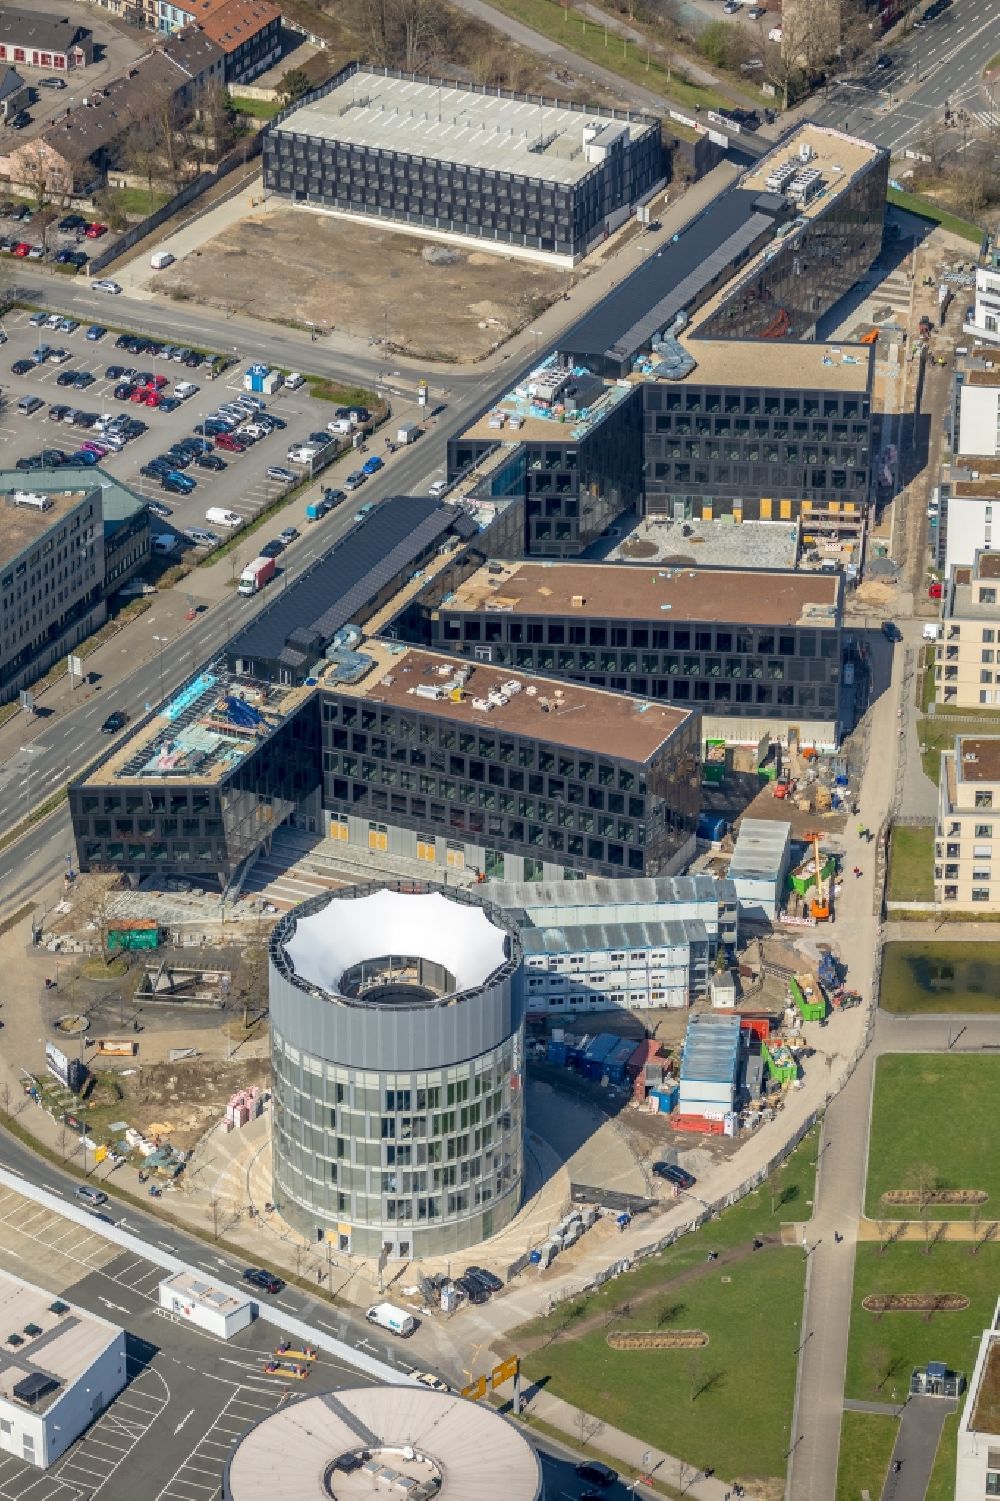 Essen from above - Construction site for the office building of Funke Media Group on Berliner Platz in Essen in the state of North Rhine-Westphalia